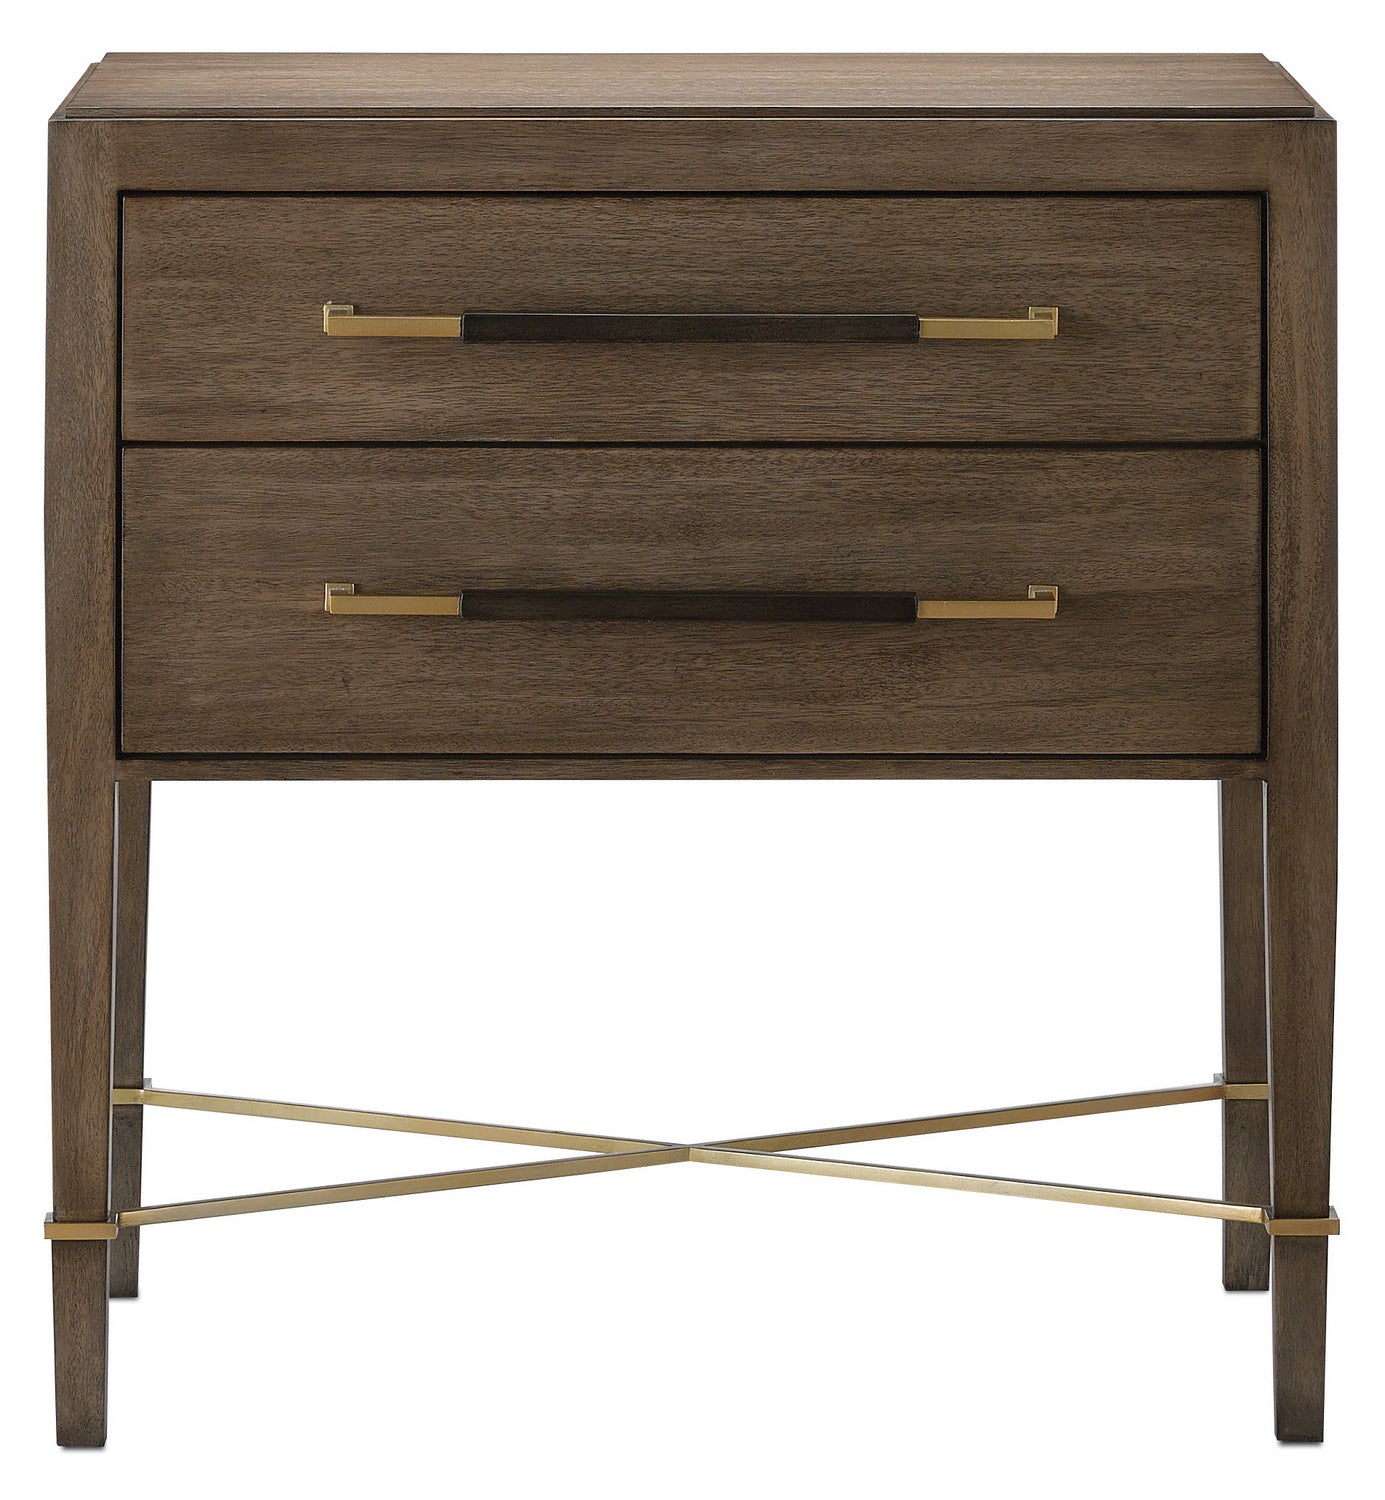 Currey and Company - 3000-0117 - Nightstand - Verona - Chanterelle/Coffee/Champagne